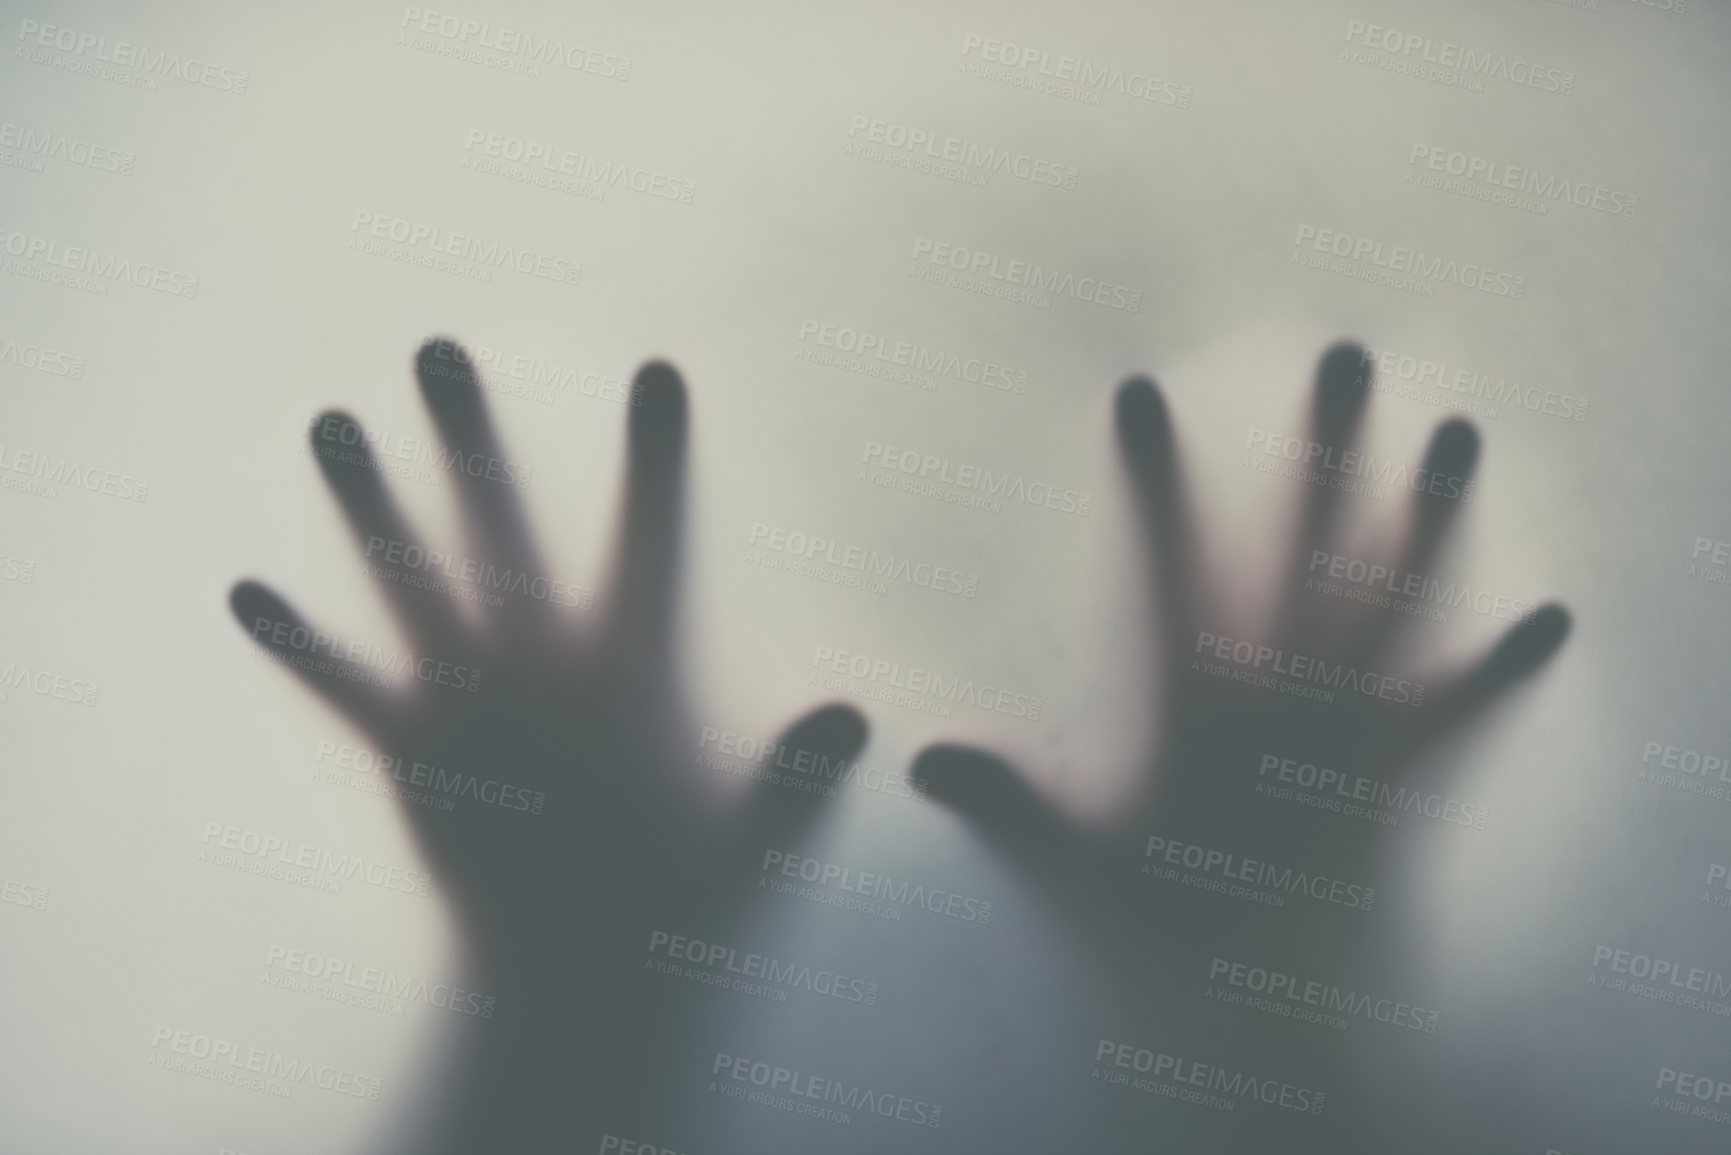 Buy stock photo Defocussed shot of a pair of hands reaching out against a plain background